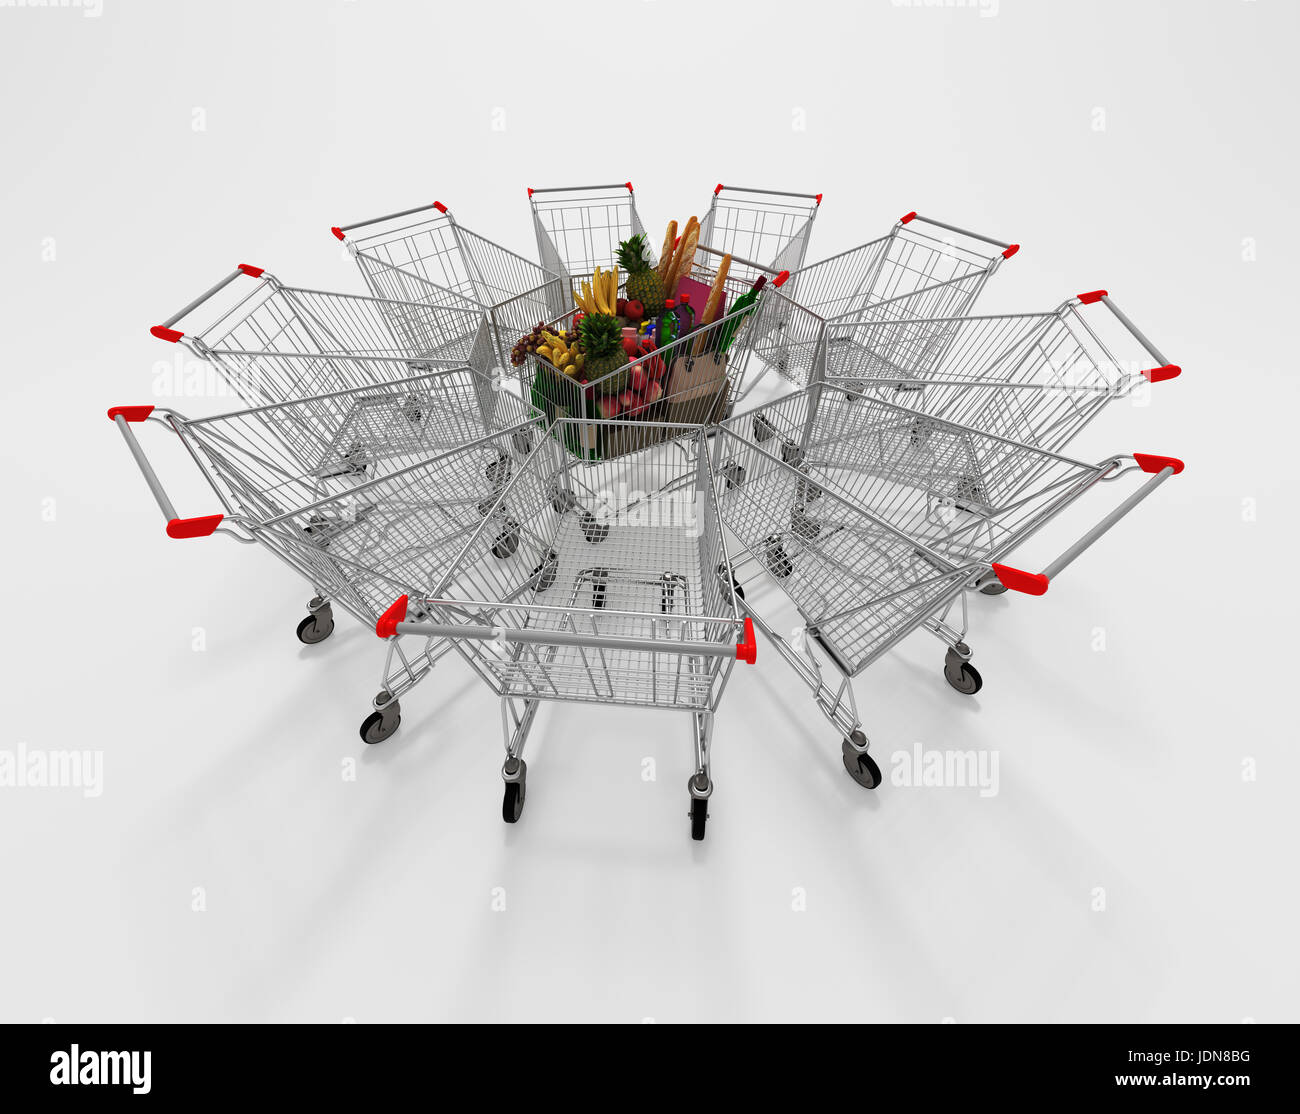 Full Shopping Cart In The Center Of Empty Shopping Carts Stock Photo